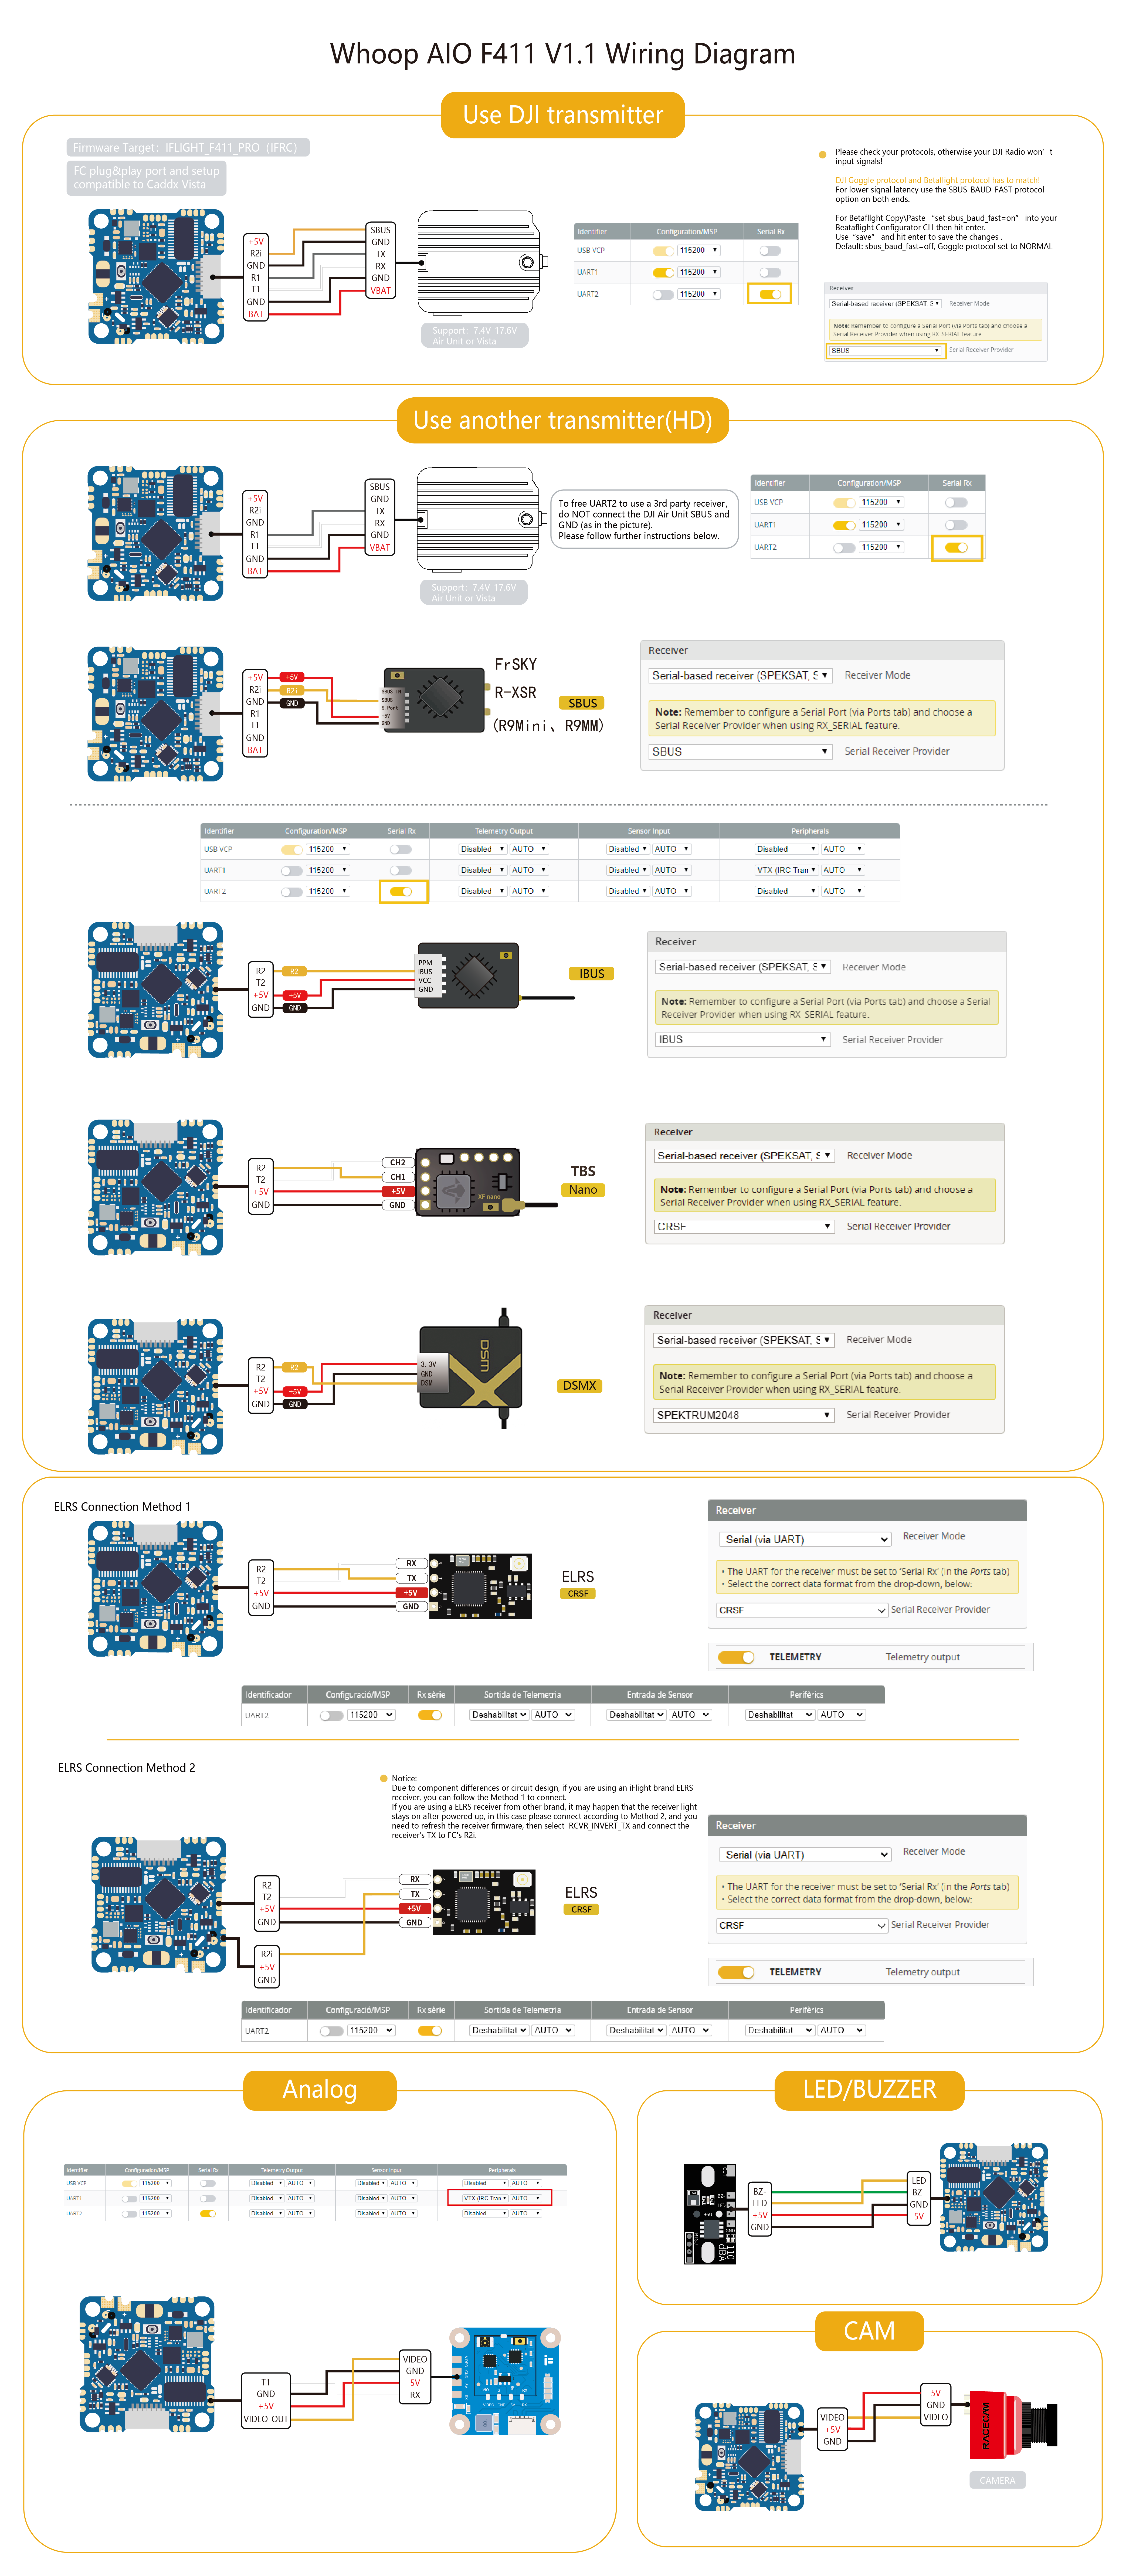 Whoop-AIO-F411-V1.1-Wiring%20Diagram.png